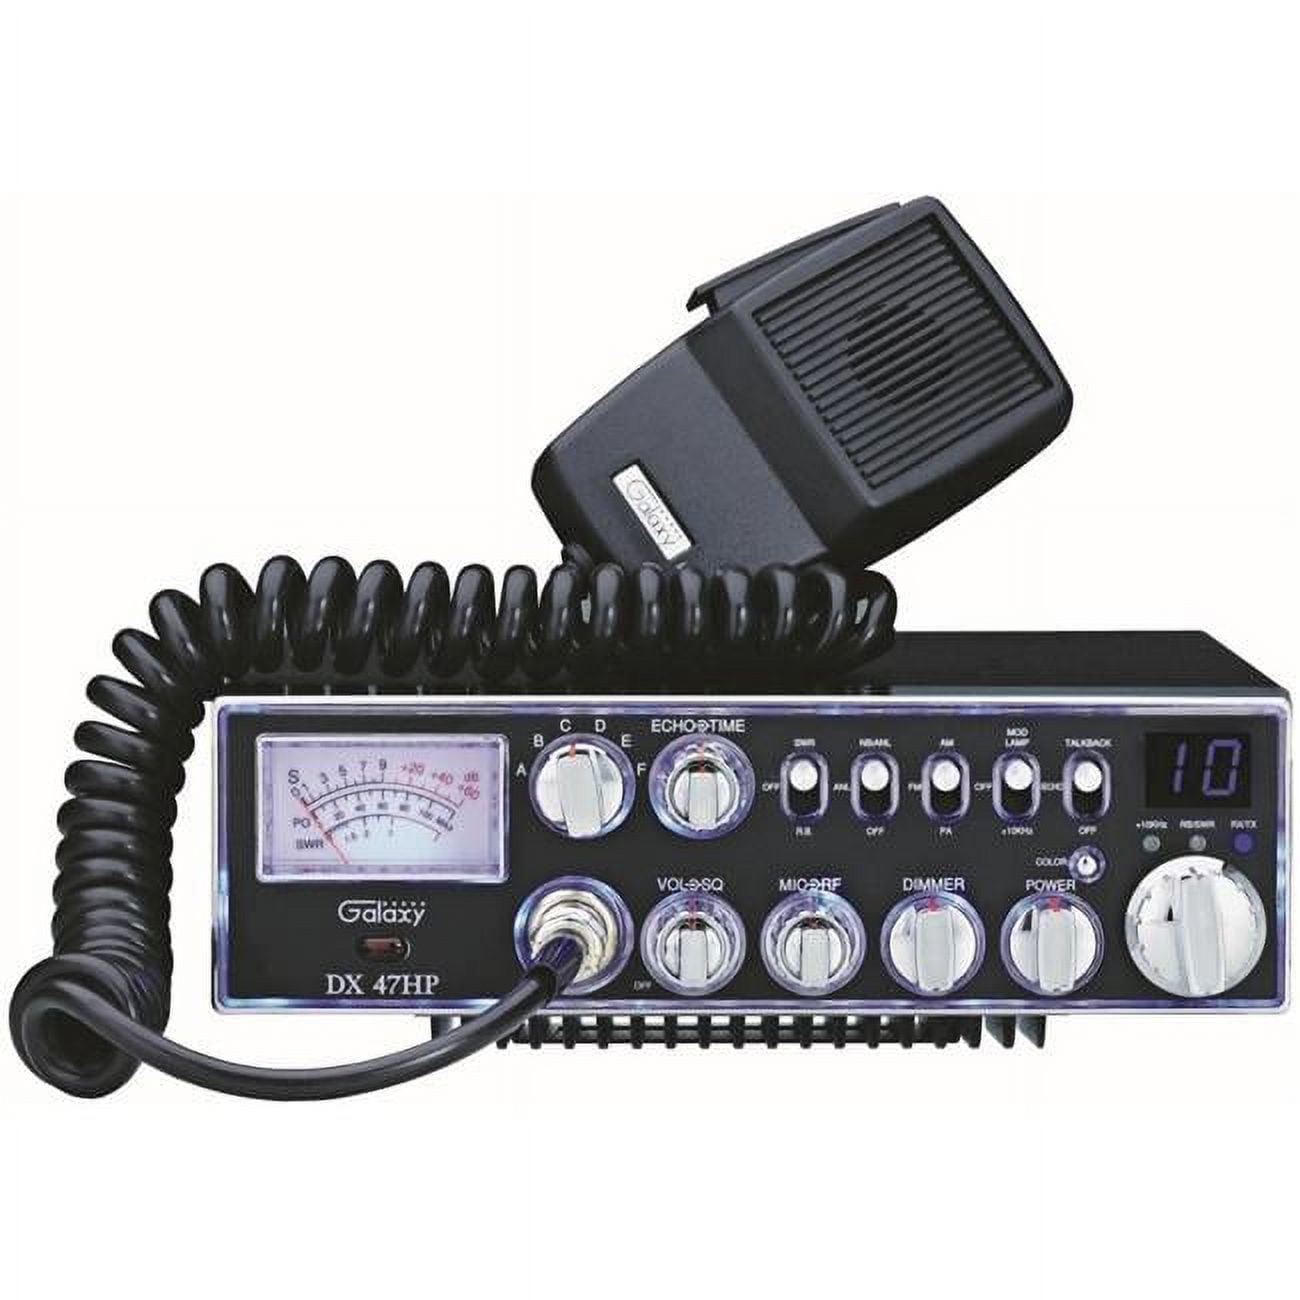 Picture of Galaxy DX47HP 100W 10m Radio with 7 Color Display